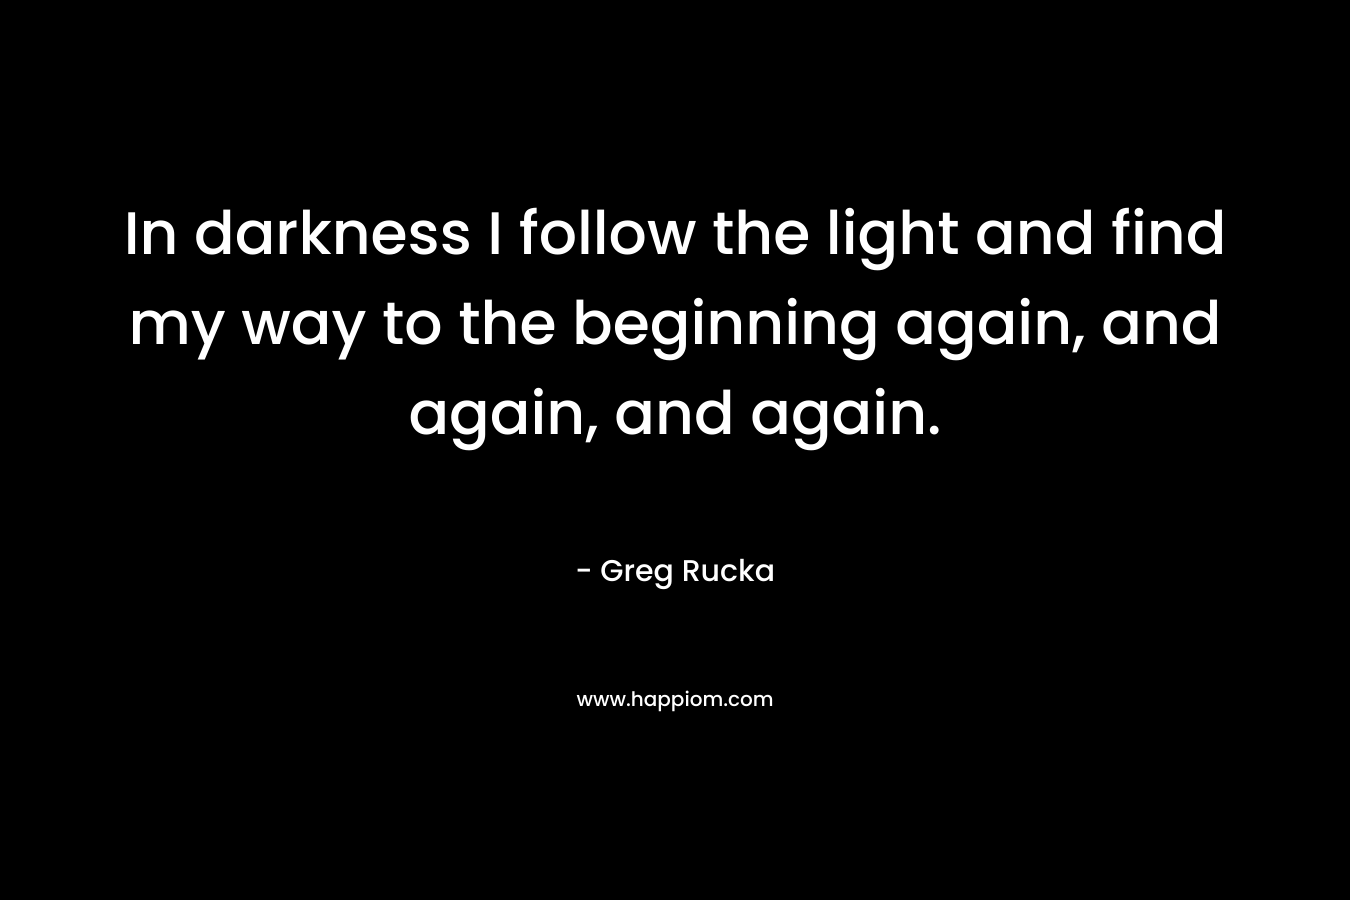 In darkness I follow the light and find my way to the beginning again, and again, and again.